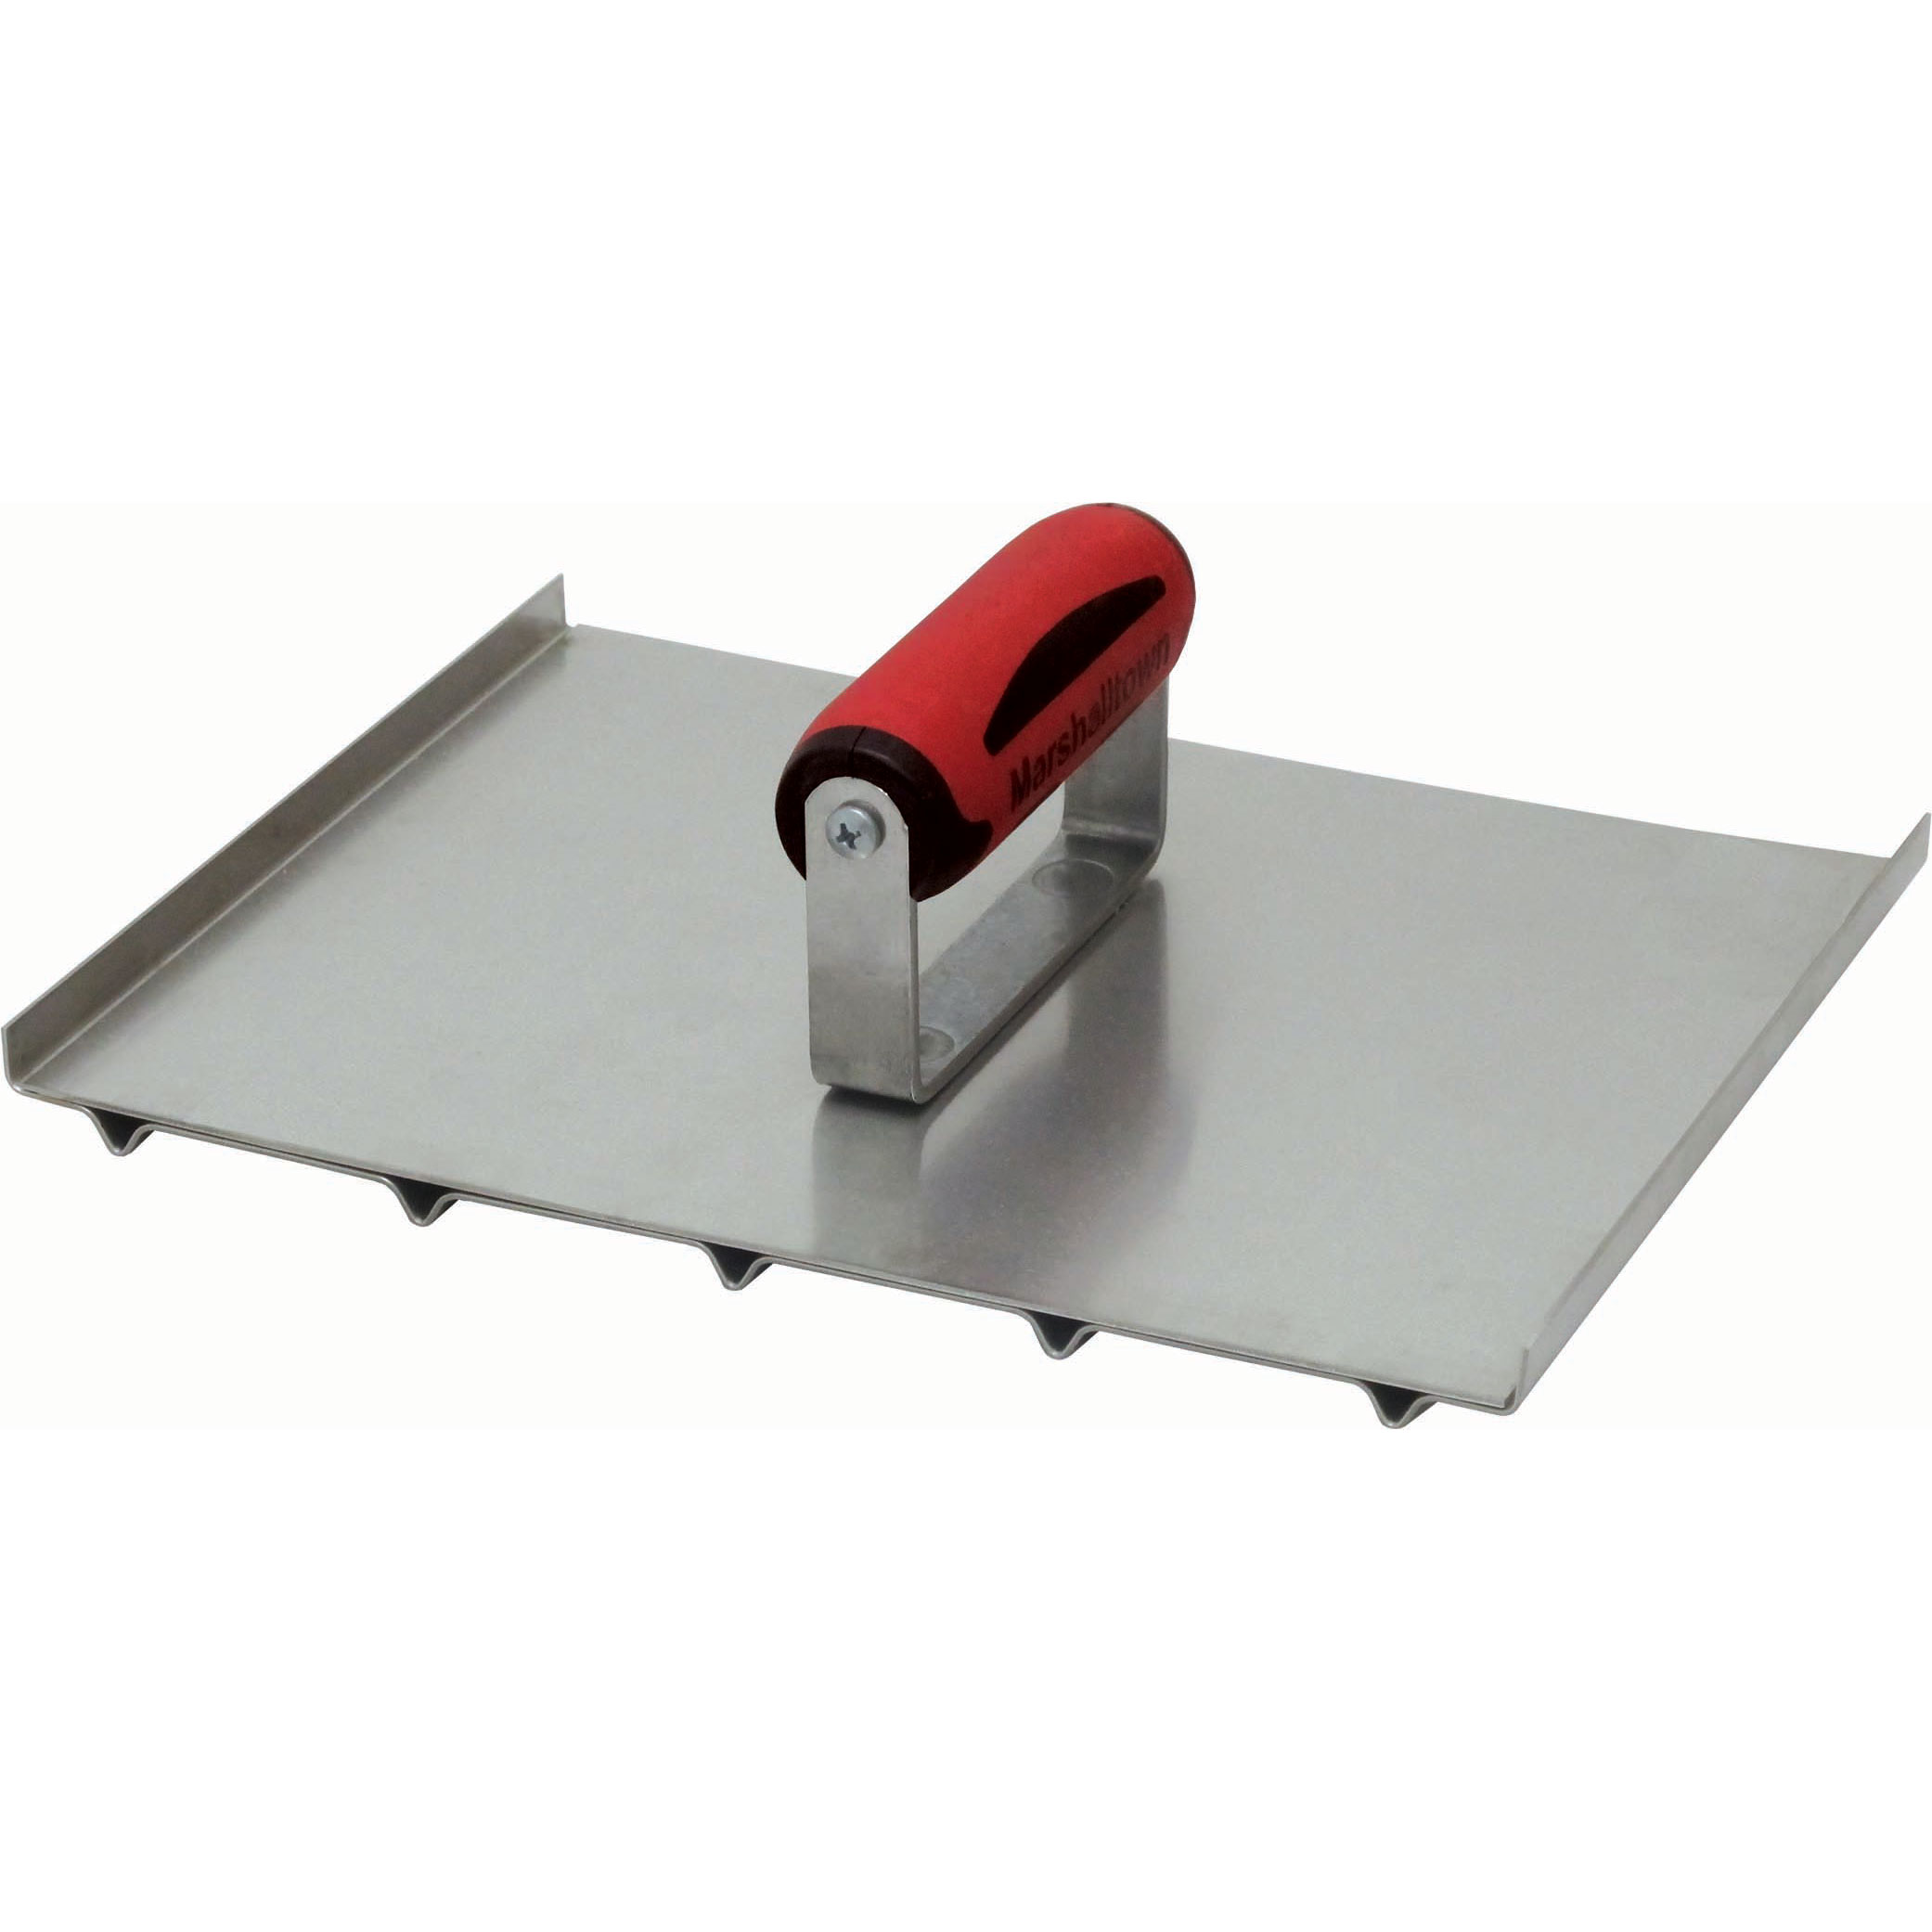 Marshalltown WCG093D 8in x 10-1/2in Stainess Steel Wheelchair Hand Groover-DuraSoft Handle MAT-WCG093D